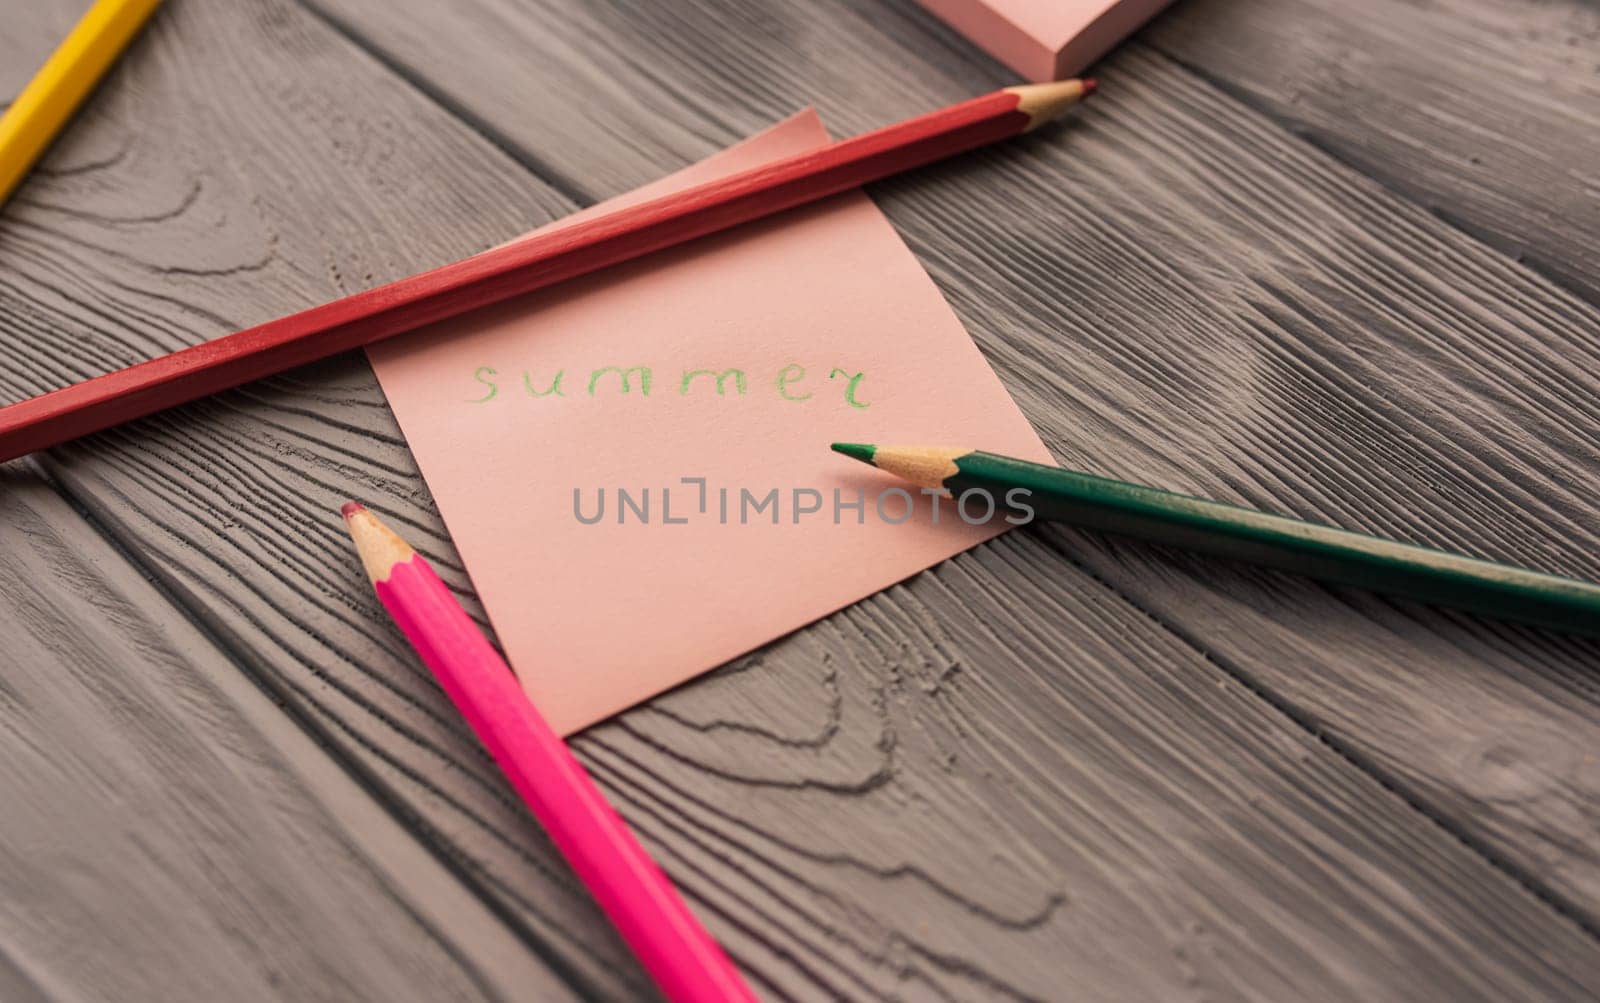 artist multicolored pencils sketch paper card inscription summer. Yellow red blue pencils. Summer background template mockup space blank colorful composition text. Top view above wooden background